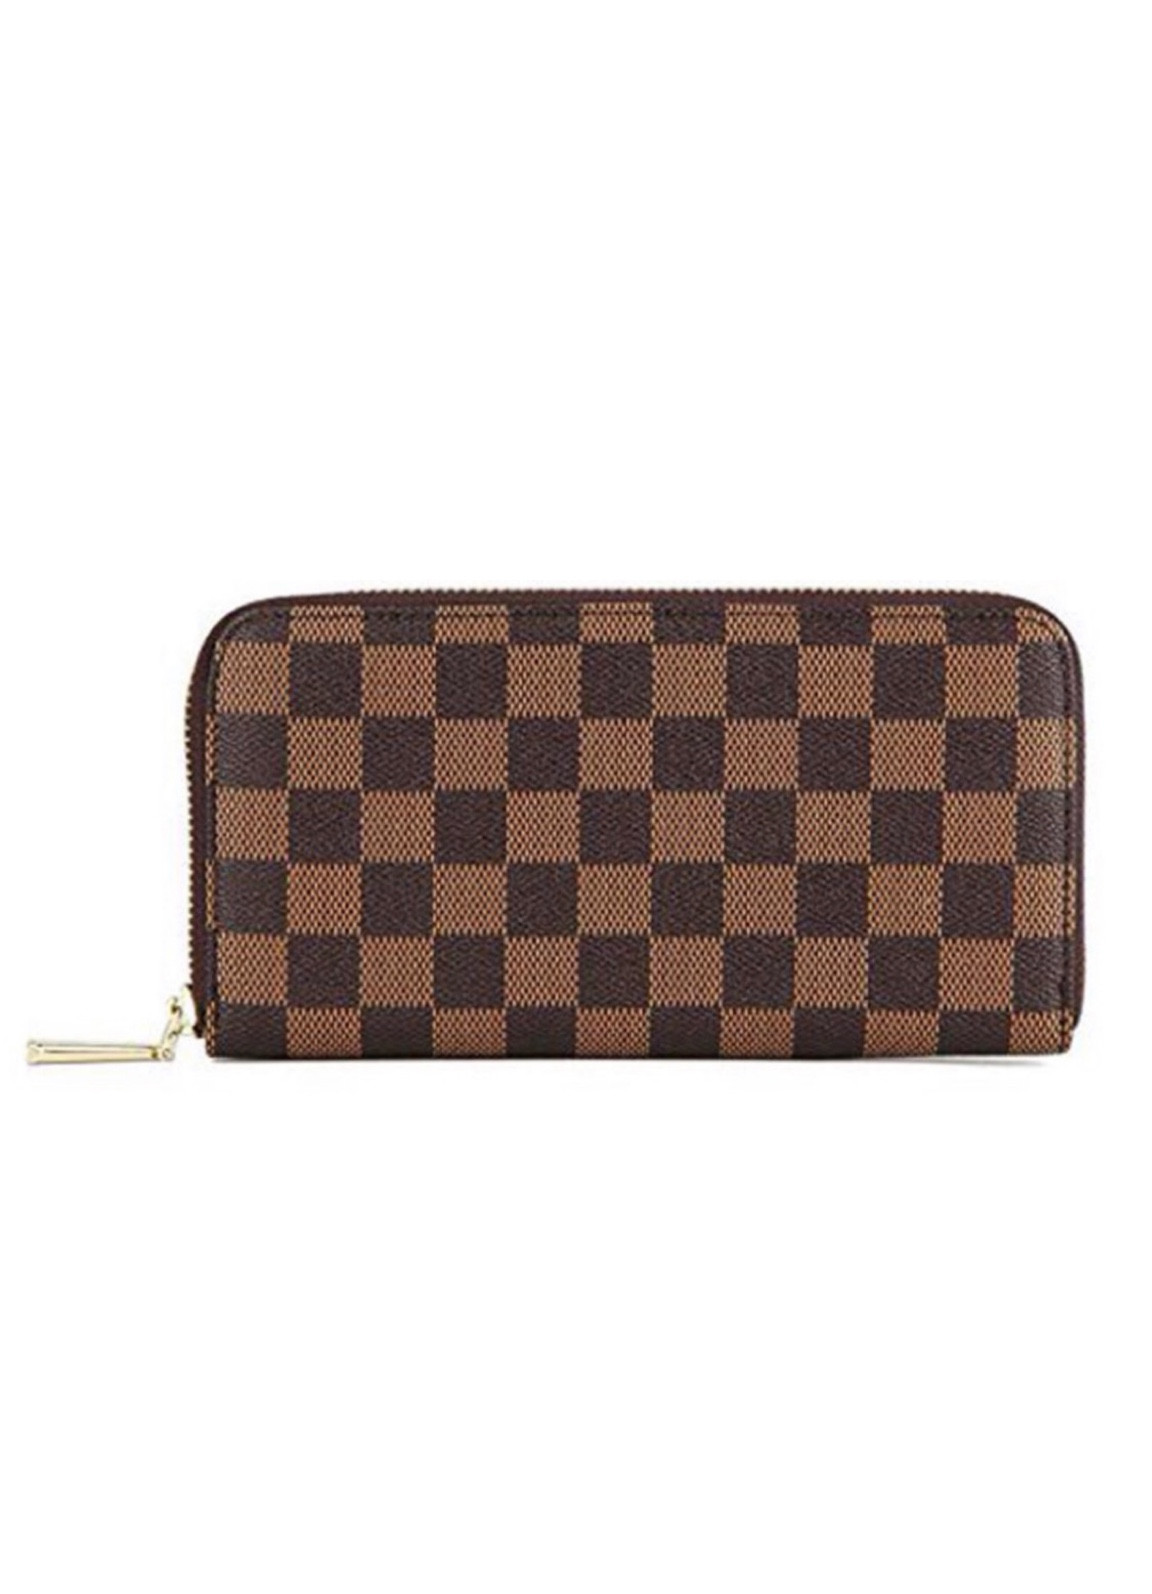 Checkered Zip Around Wallets for Women, Lady Phone Clutch Holder, PU Leather  RFID Blocking with Card Organizer, Brown 